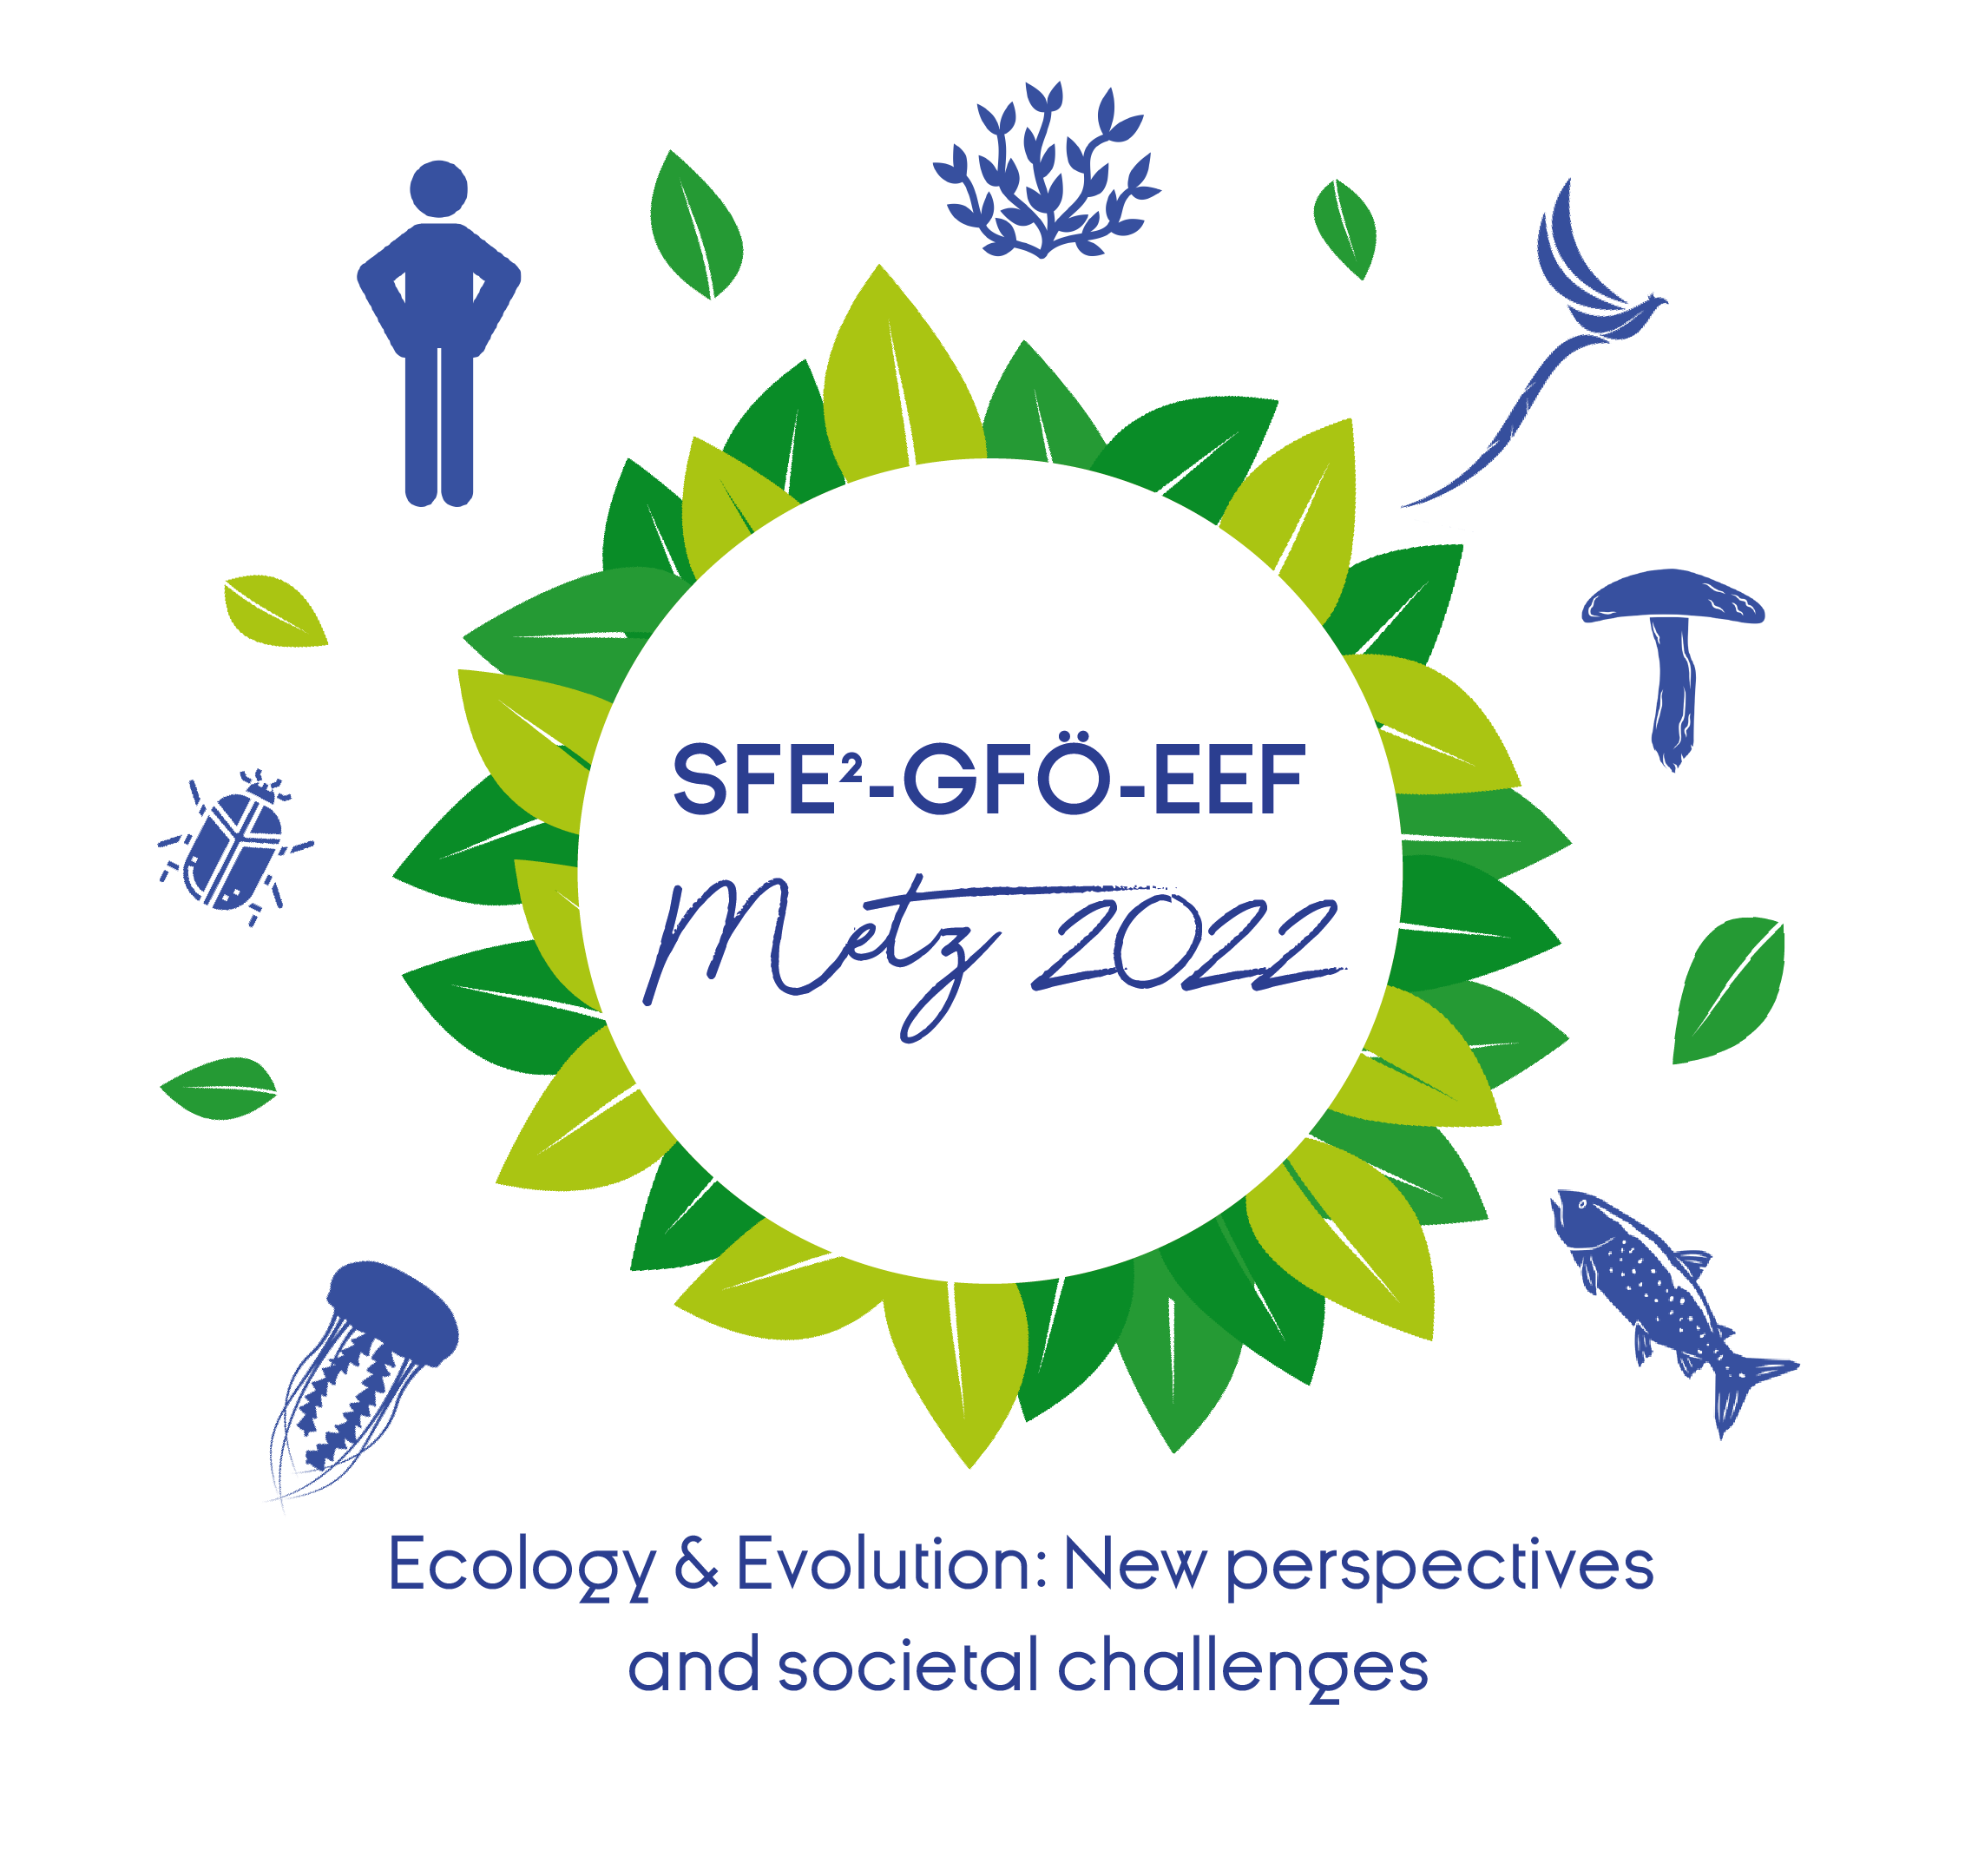 Joint Meeting SFE2-GfÖ-EEF : Call Open for Symposia and Workhops. Deadline April 1st